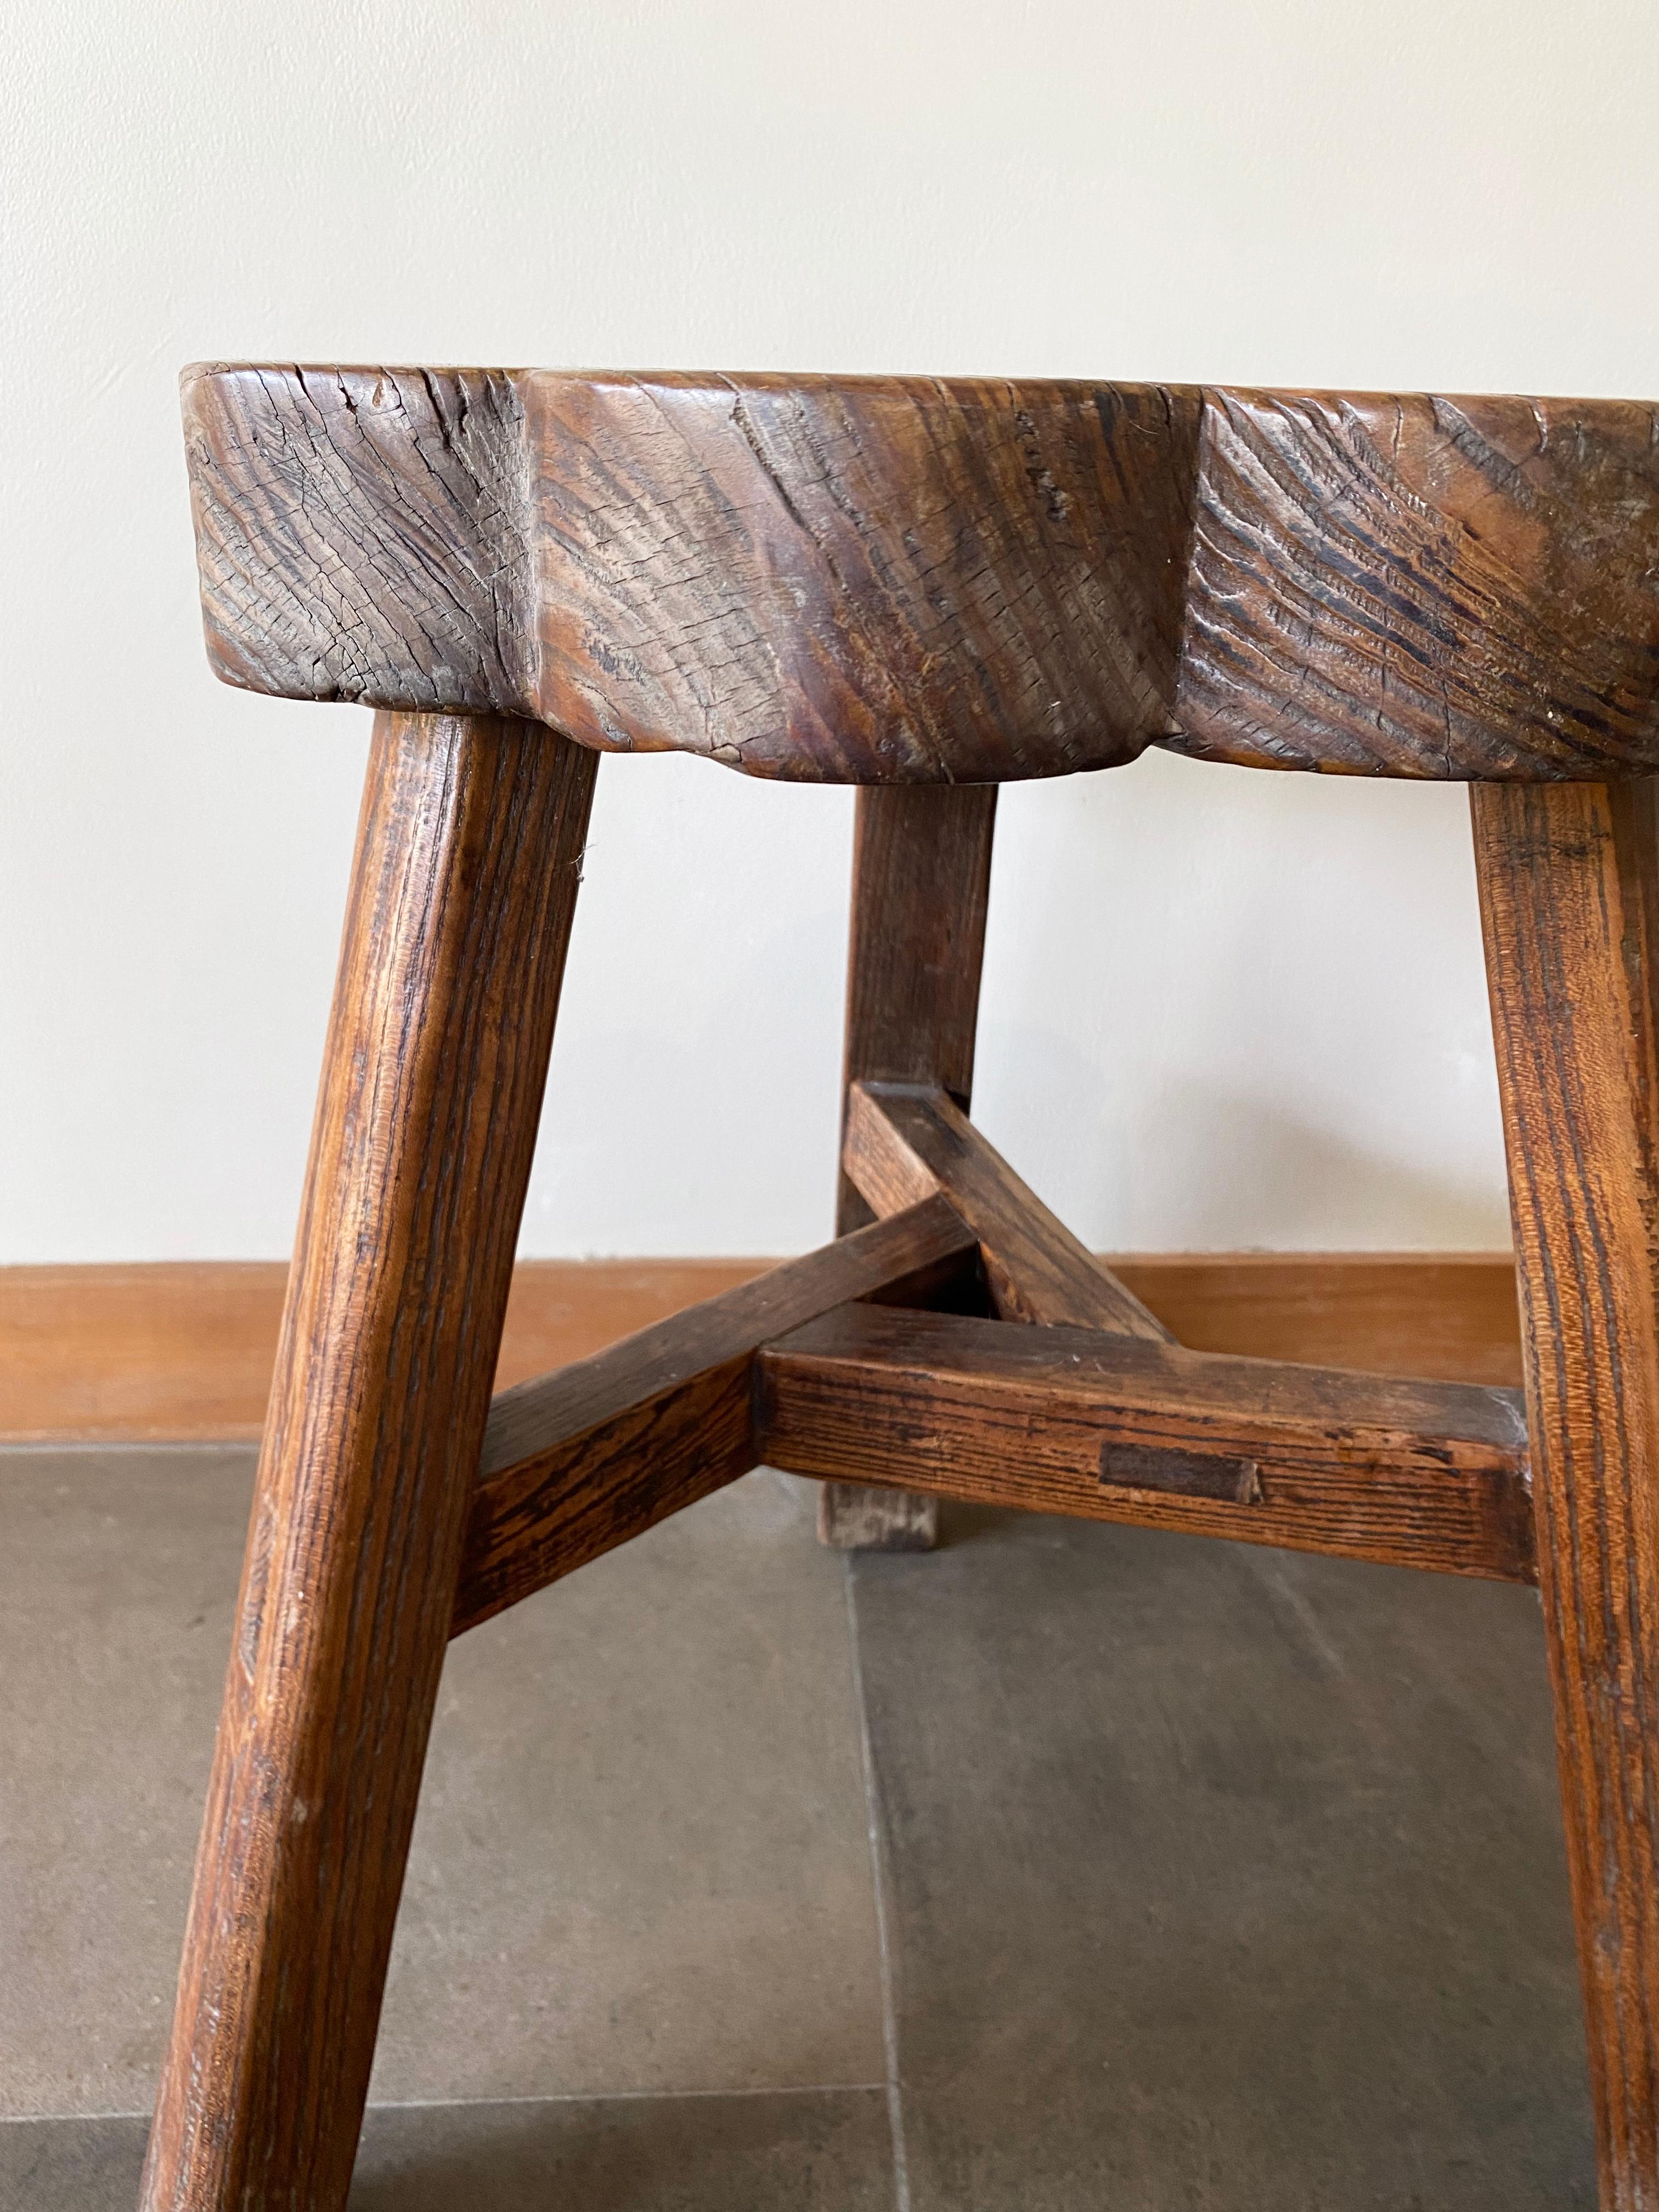 Hand-Crafted Antique Chinese Elm Wood Stool with Floral Wood Detailing, Early 20th Century